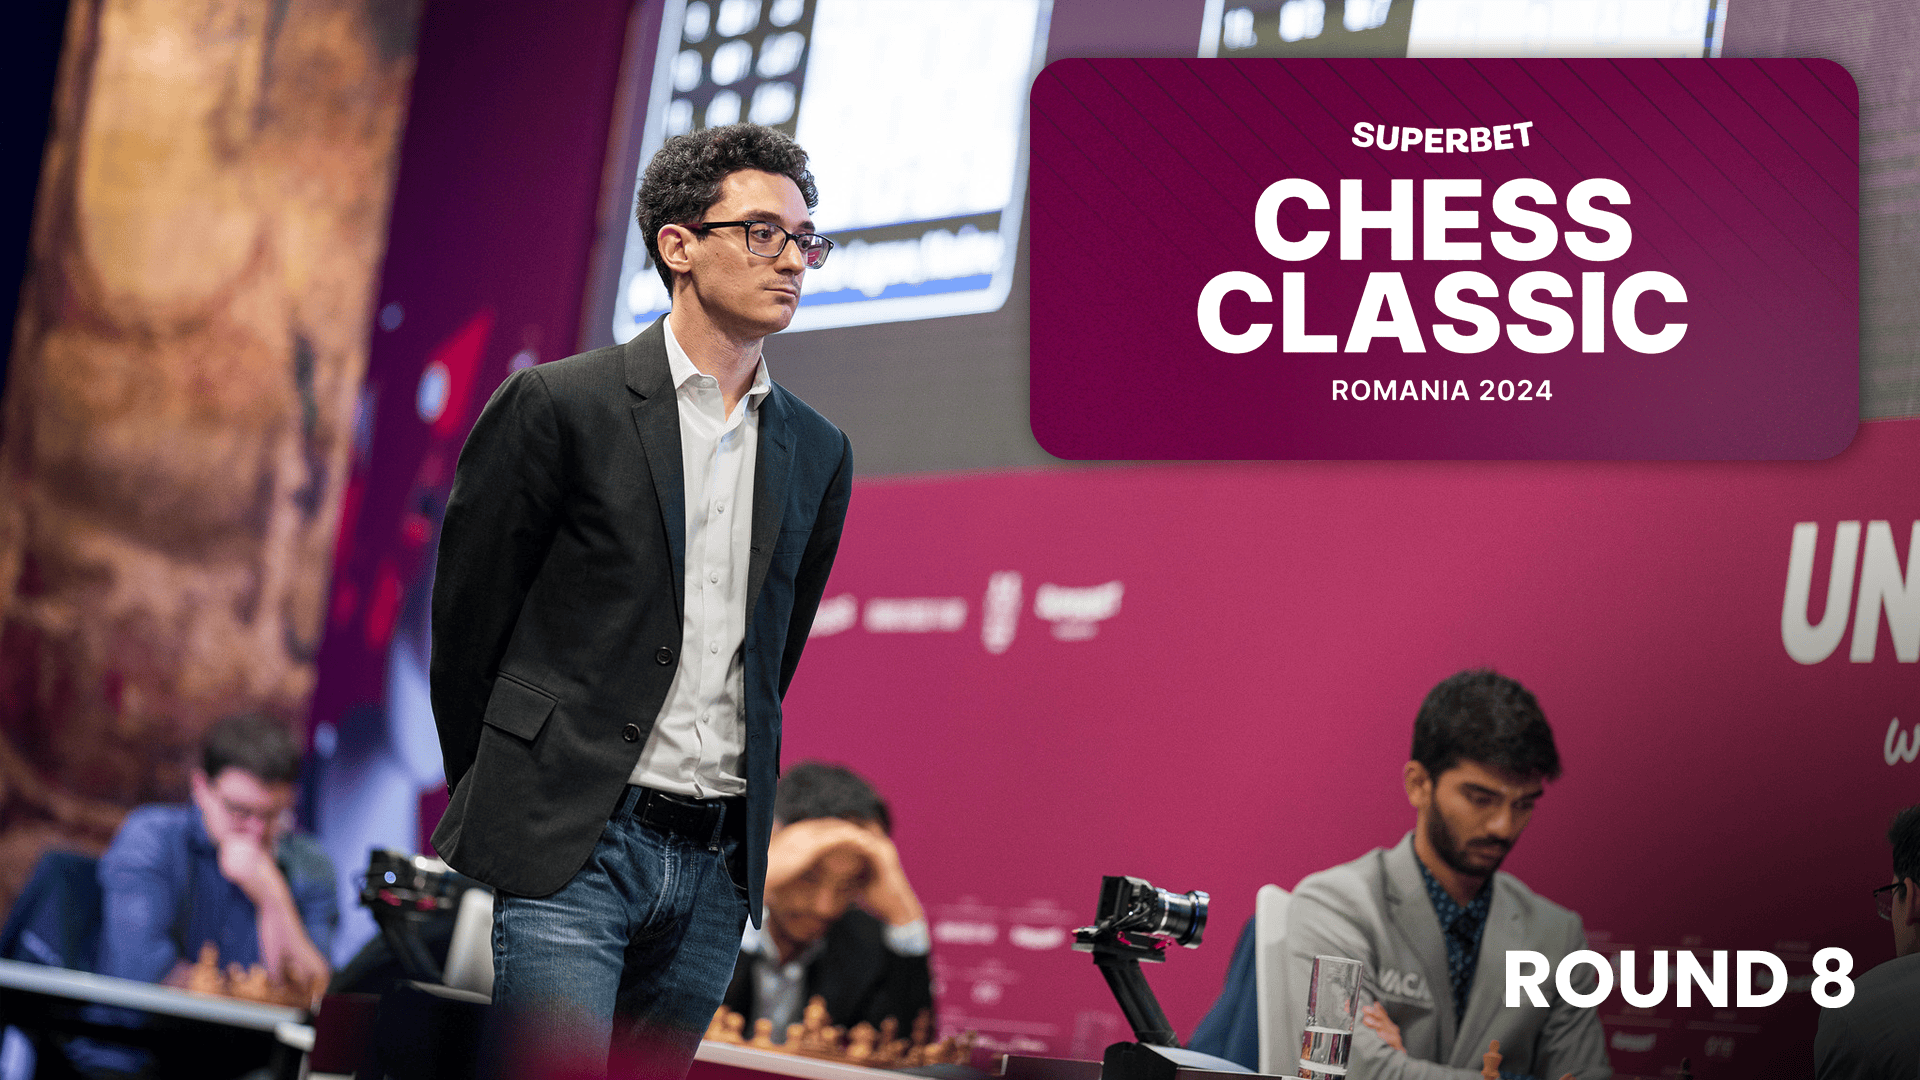 Superbet Chess Classic Round 8: Caruana Remains Favorite In Bucharest After Another Day Of Draws